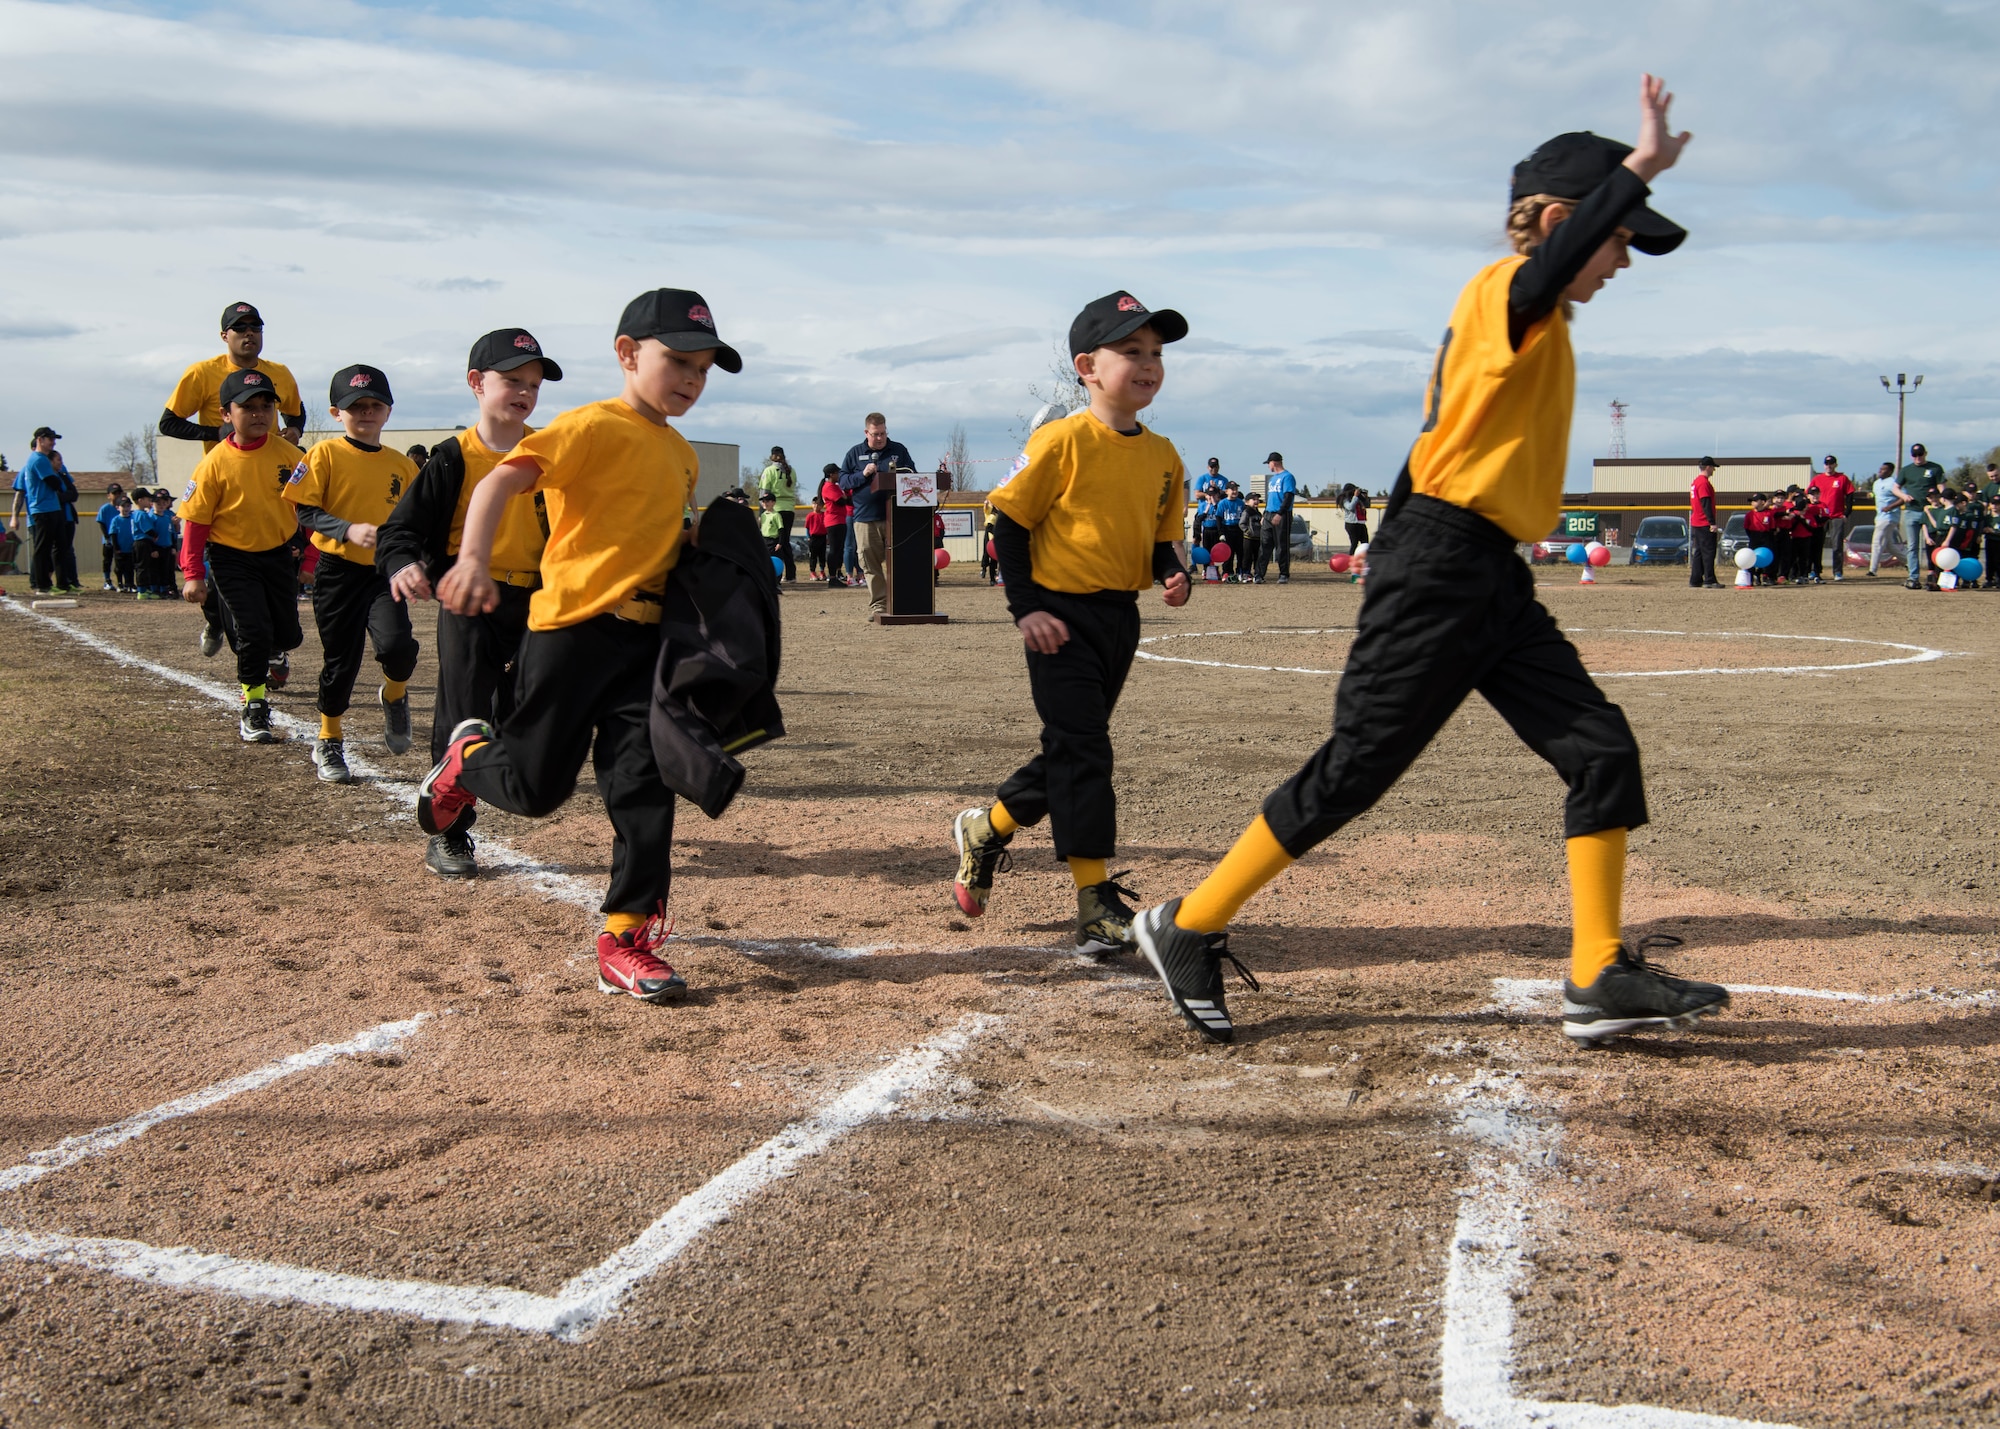 The Lions T-Ball team runs the bases during the Little League opening day ceremony at Joint Base Elmendorf-Richardson, Alaska, May 12, 2018. The ceremony included the posting of the colors, the national anthem, guest speakers – to include the coach and youth of the year winners. All games started immediately following the ceremony and continued throughout the day.